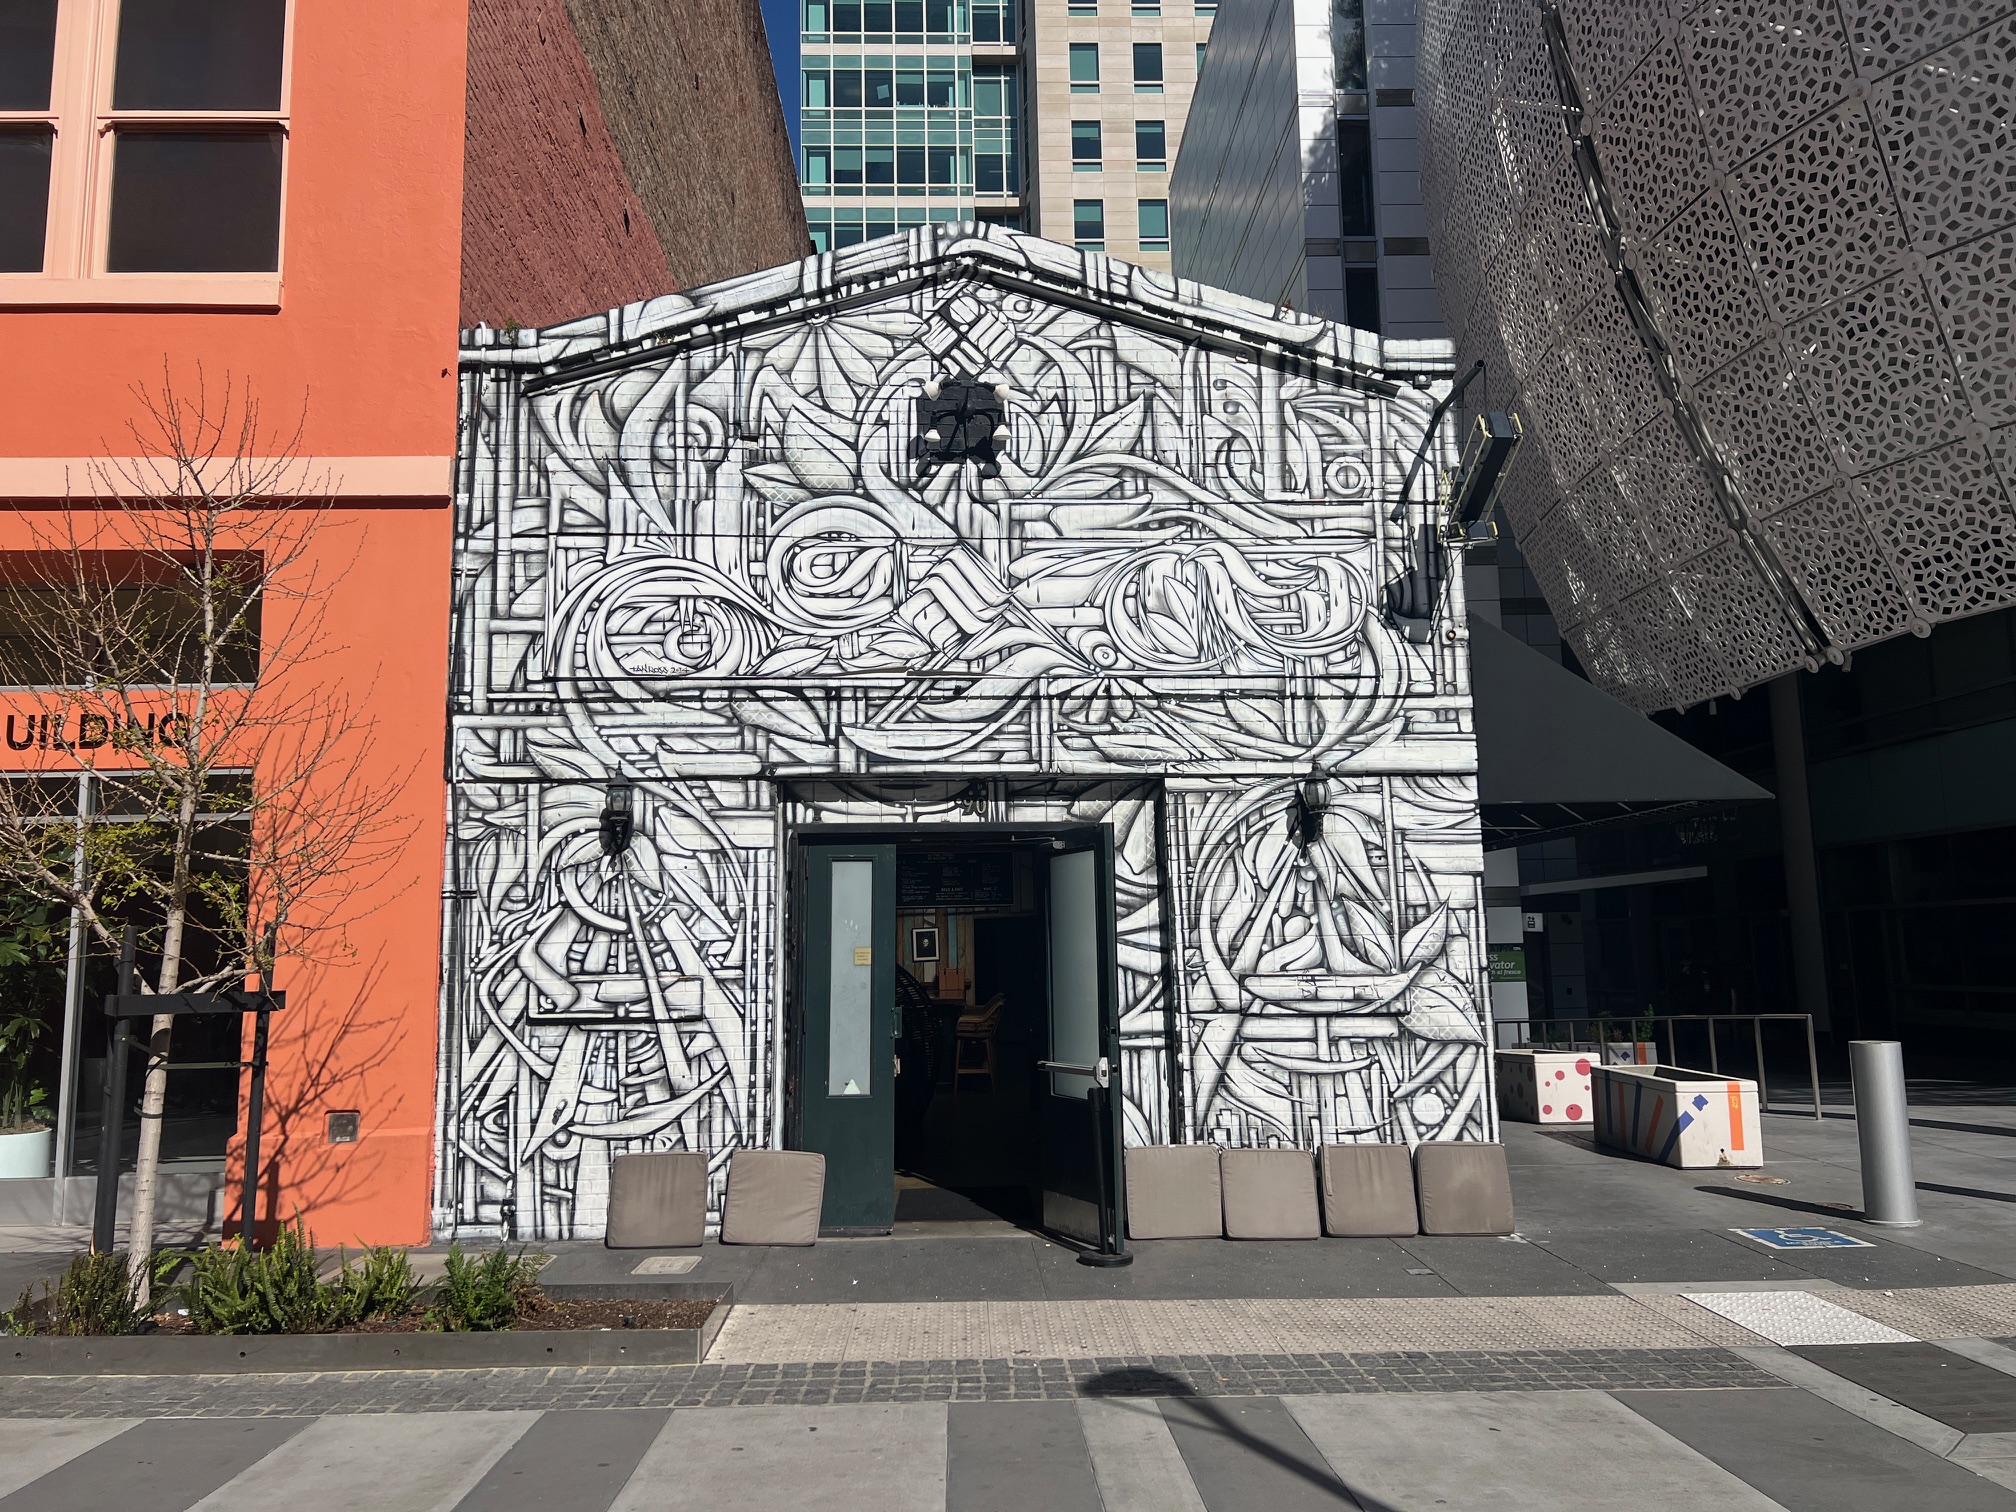 A building's facade is adorned with a large, intricate black and white mural with abstract figures and patterns.